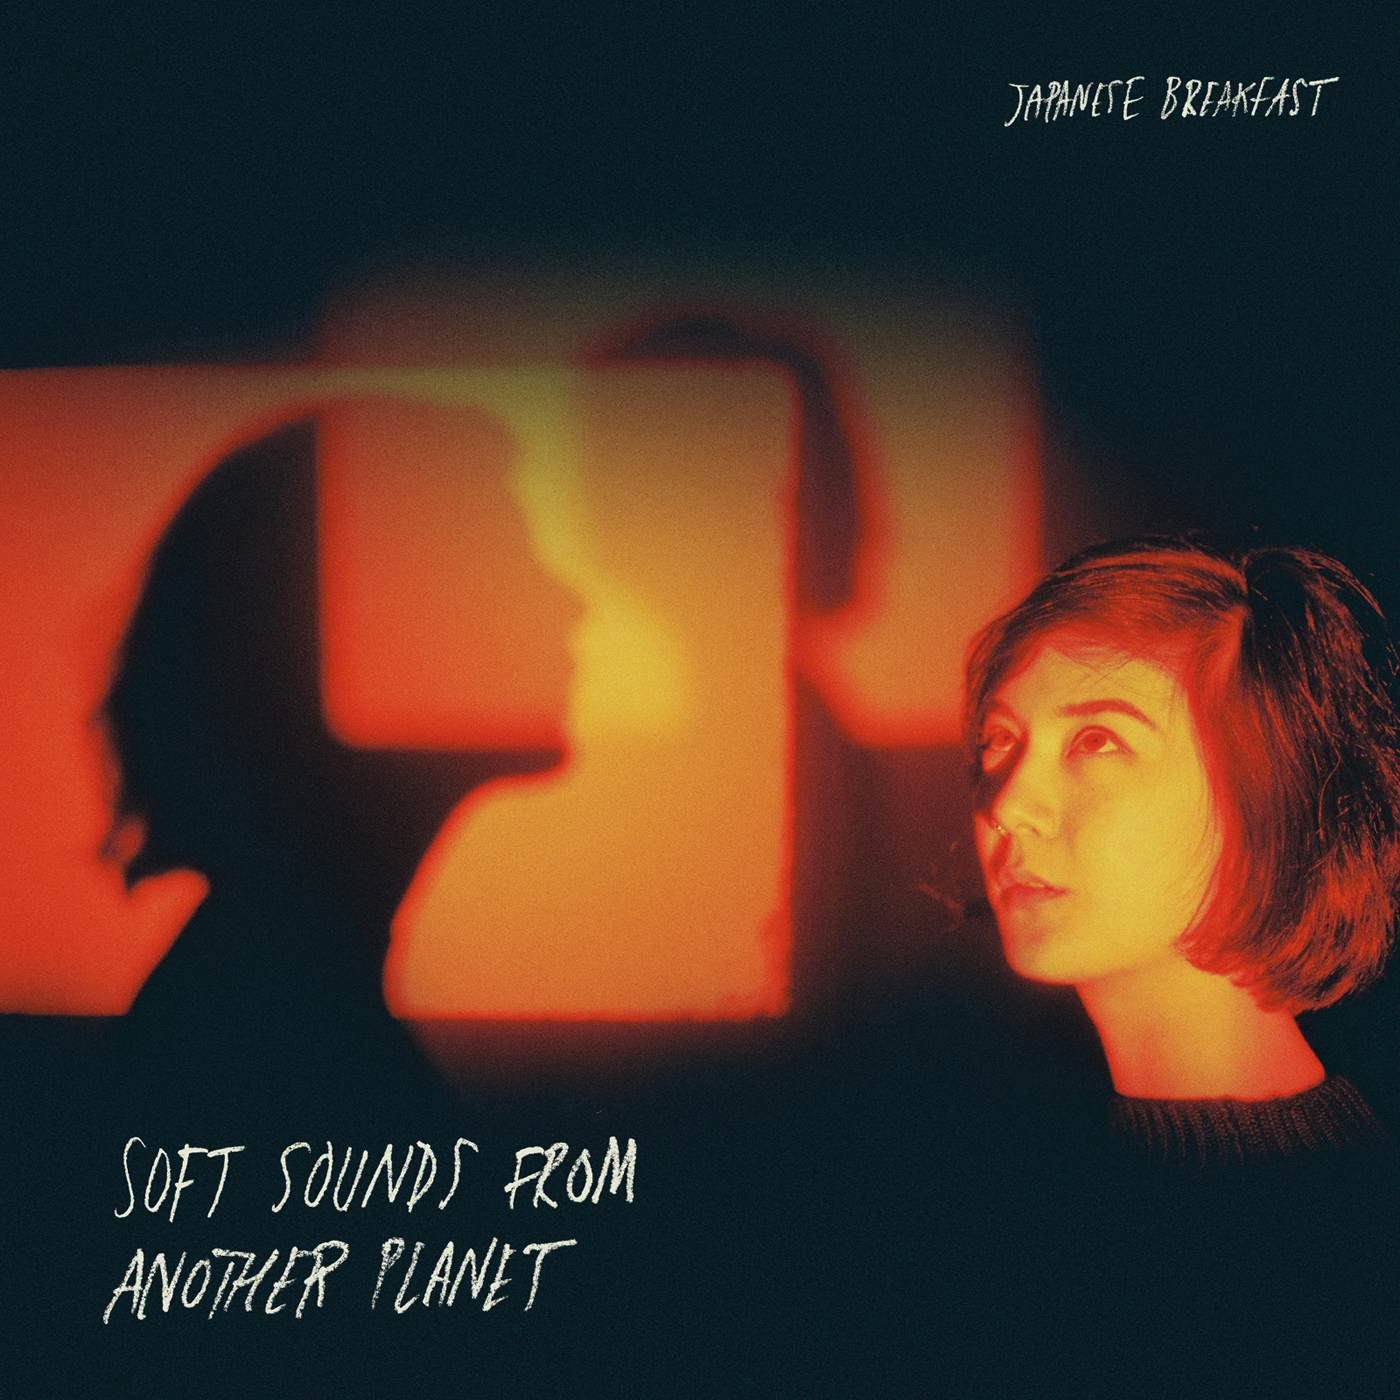 Japanese Breakfast SOFT SOUNDS FROM ANOTHER PLANET Vinyl Record